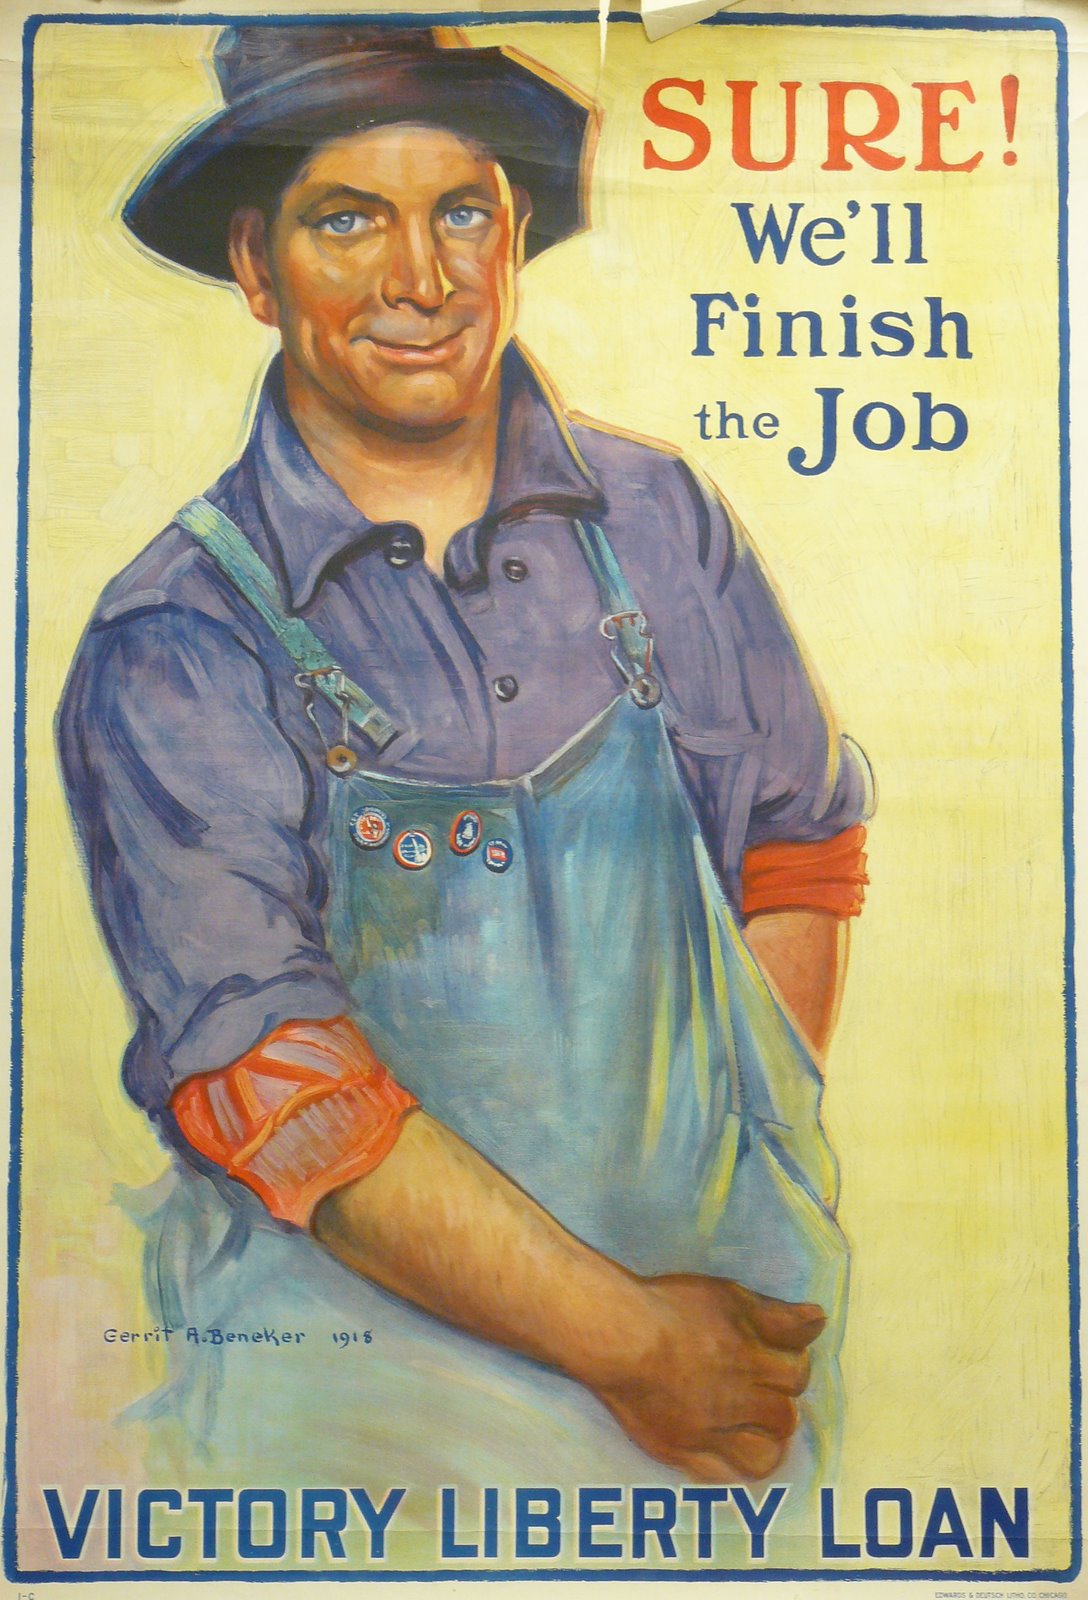 Illustration of a man in overalls reaching into his pocket, text: Sure! We'll finish the Job, Victory Liberty Loan